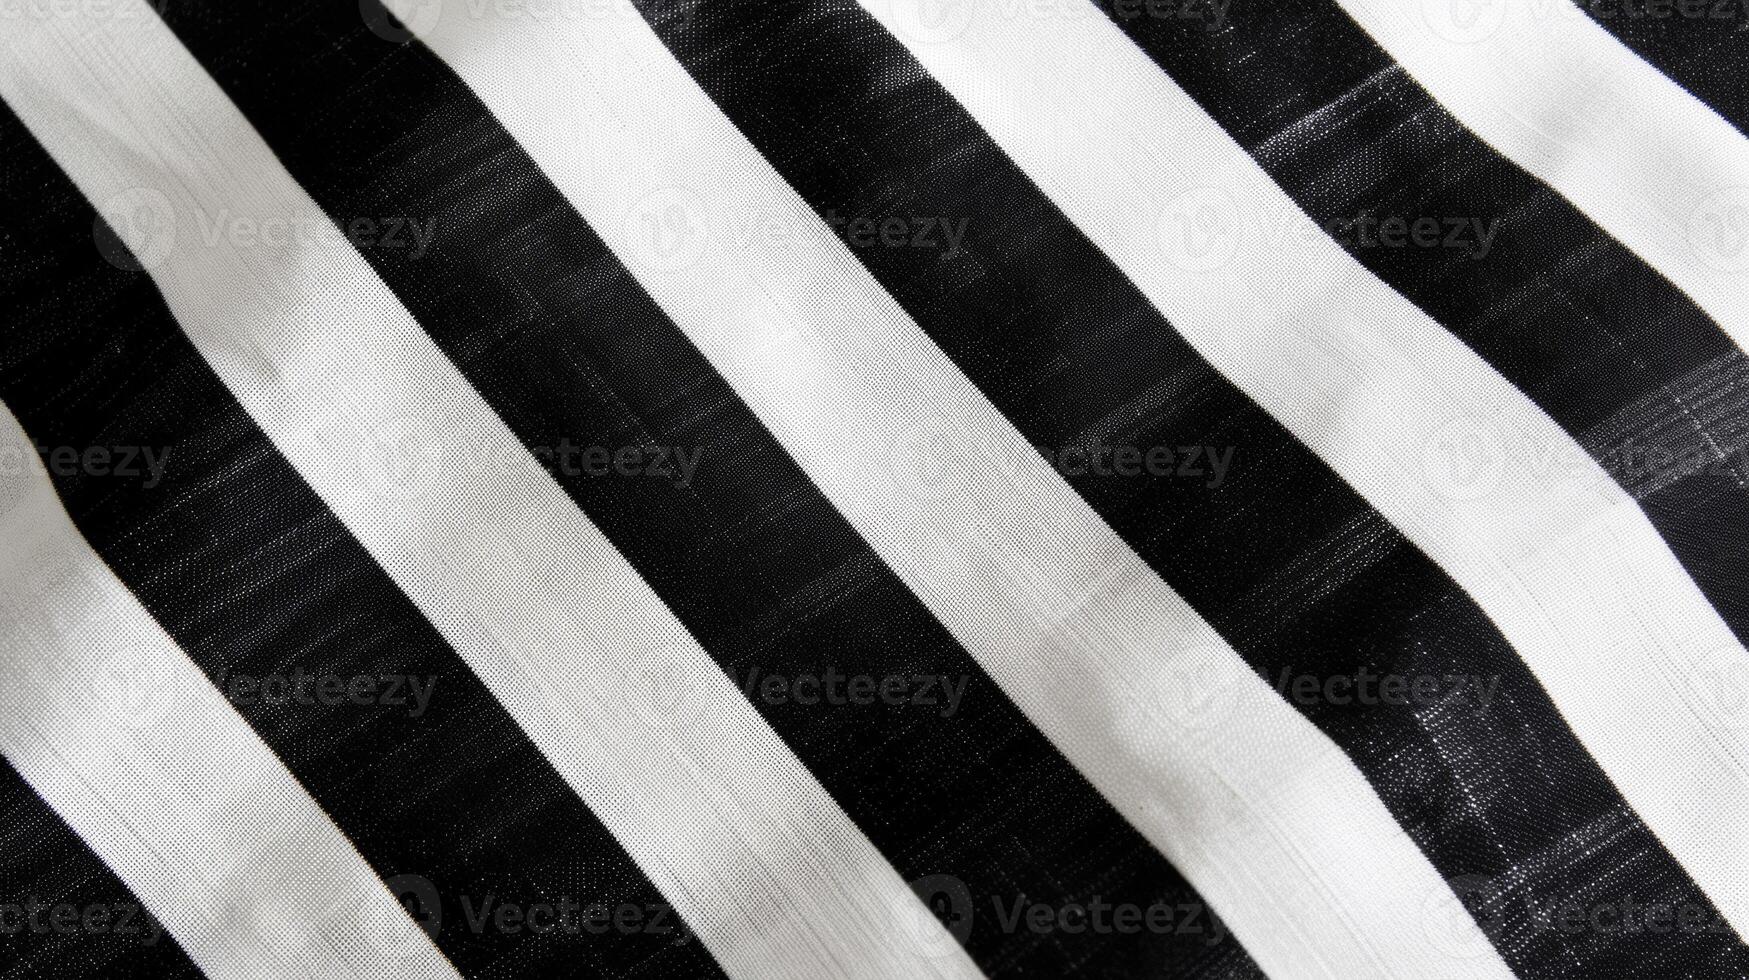 A classic and timeless look featuring thick black and white stripes against a crisp and clean white background photo